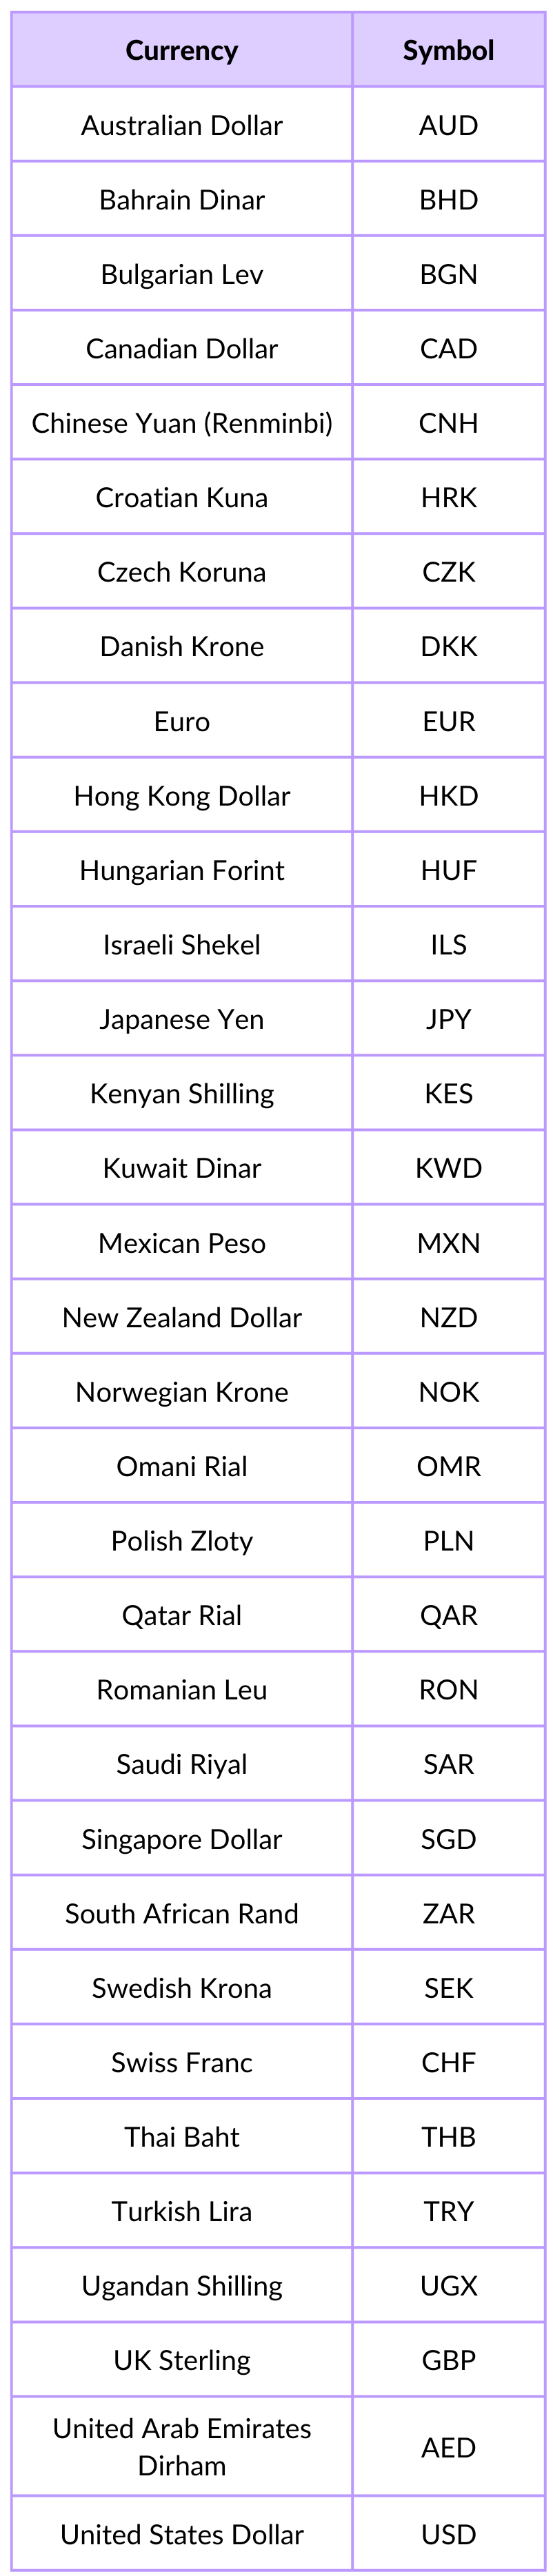 Interbank FX rate Currency List